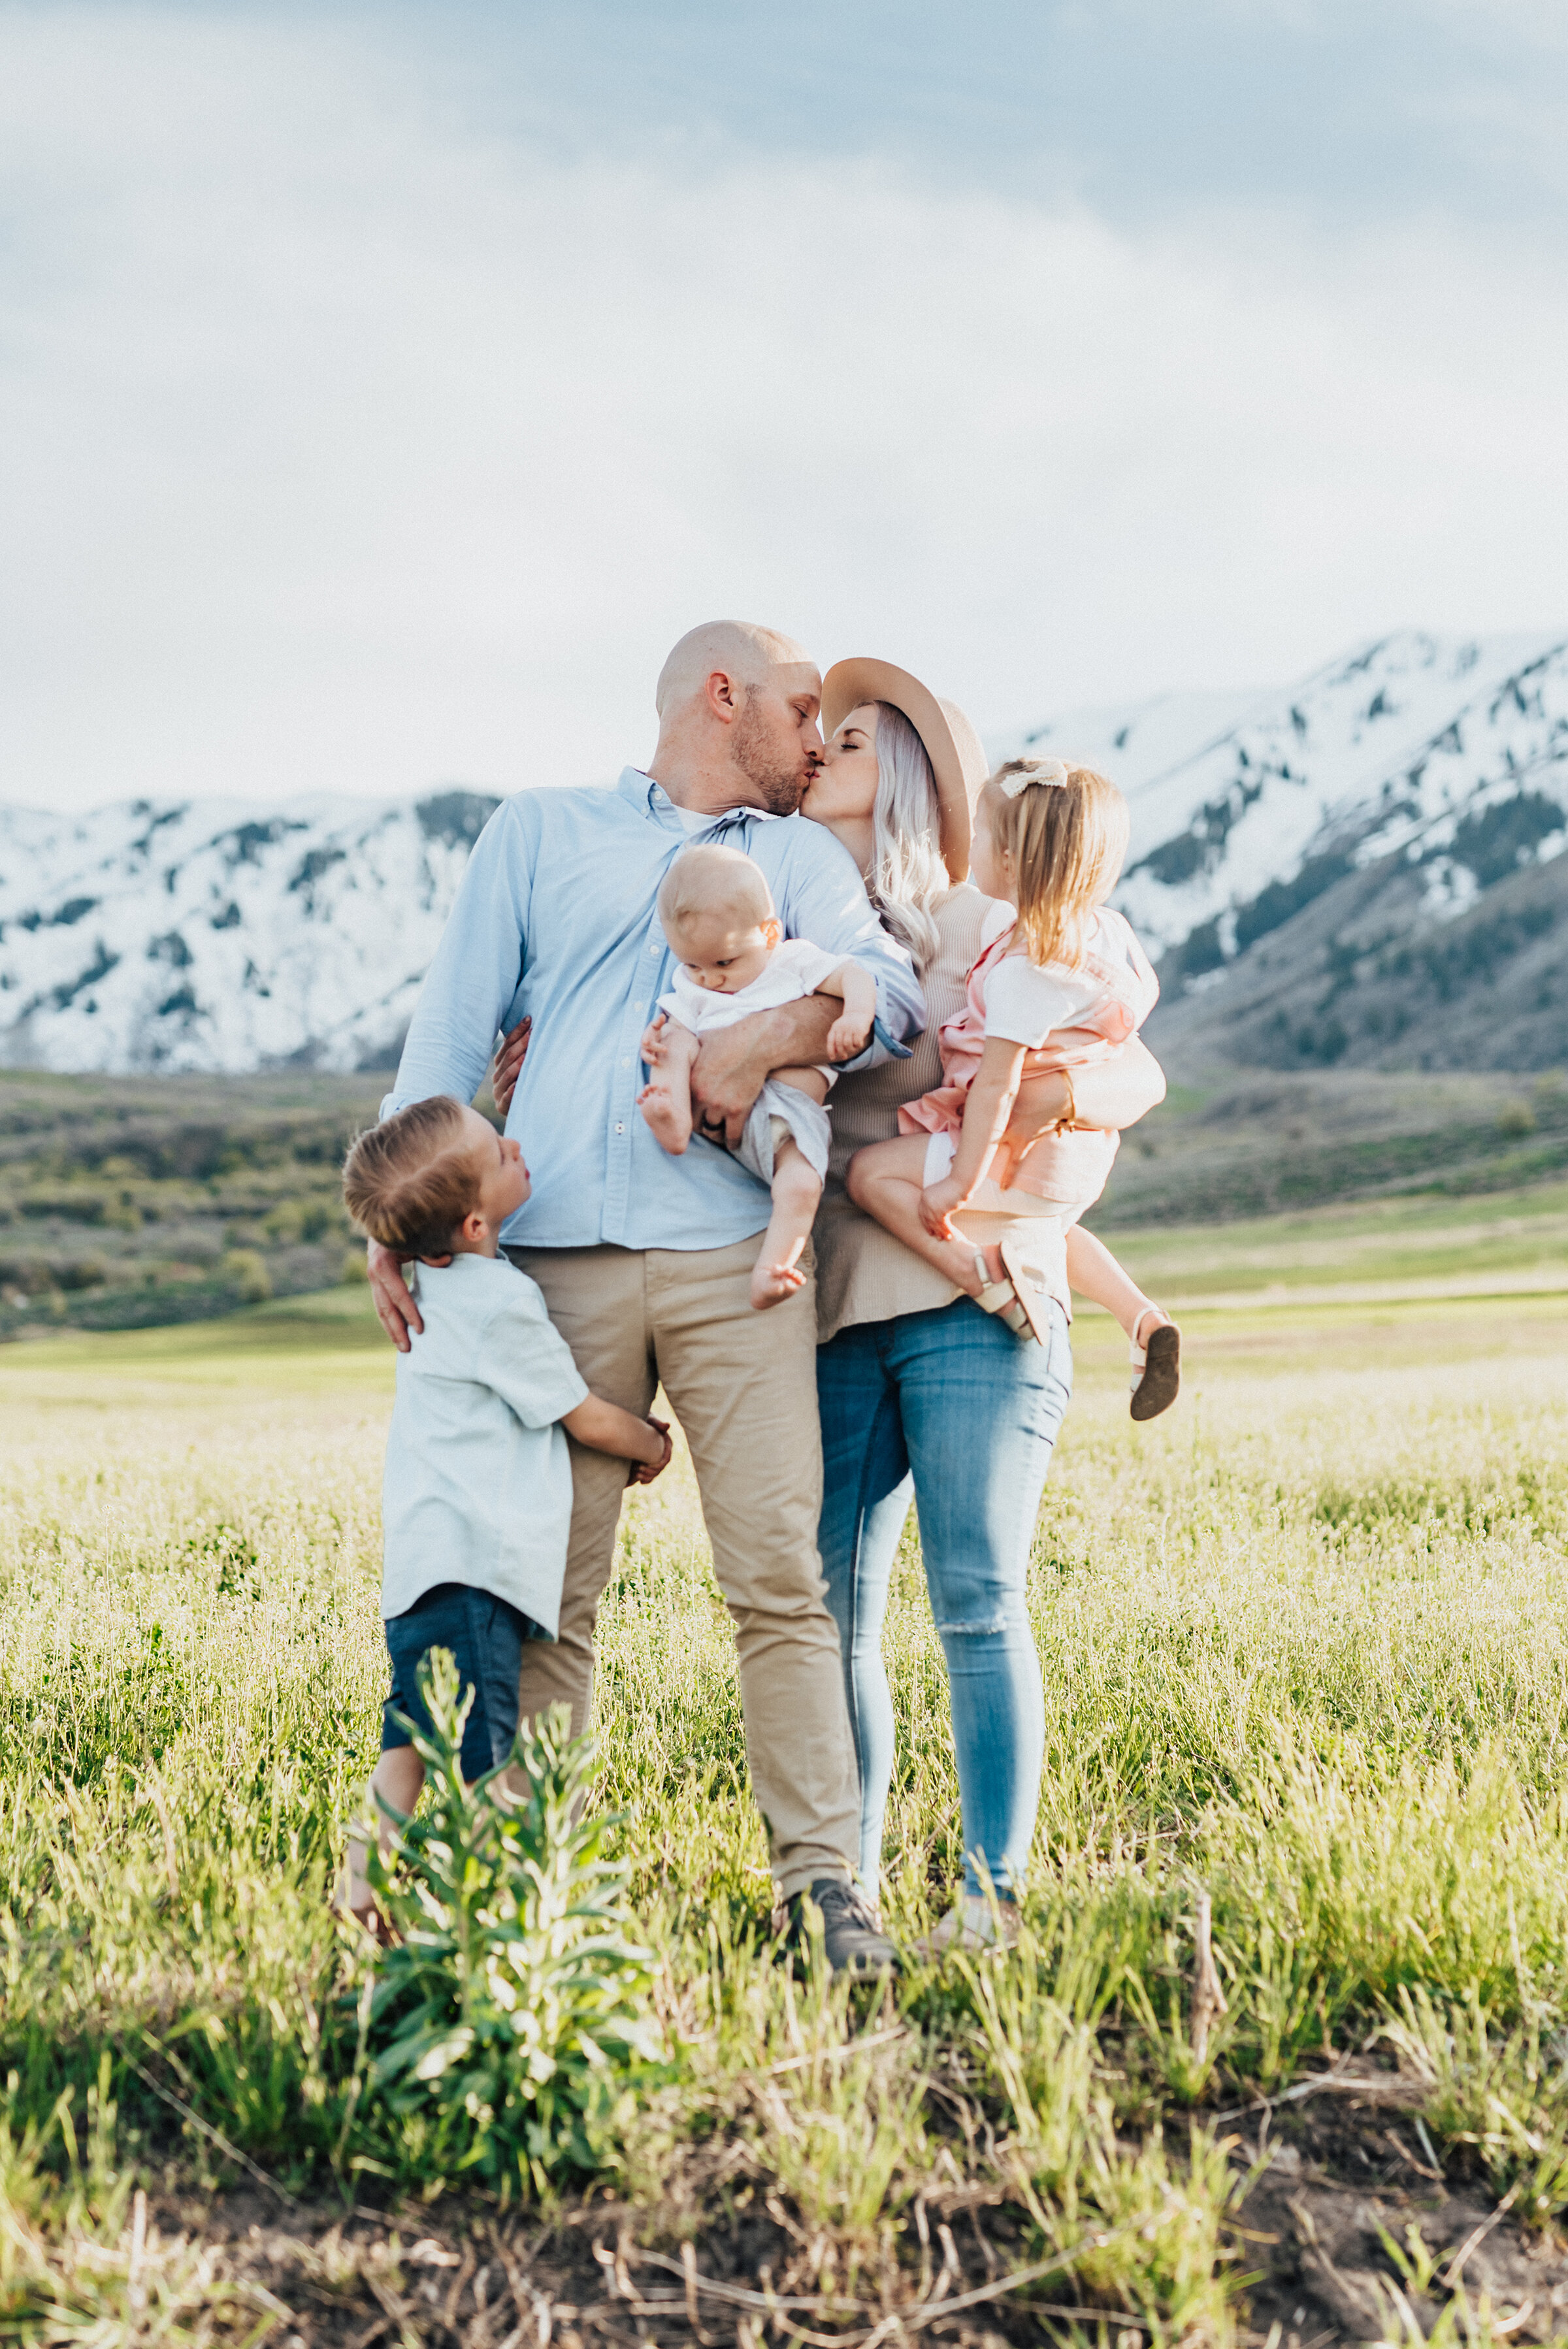  Mom and dad kiss while surrounded by their three children during a family photo session in logan utah. logan utah photography logan utah photographer mom of three children dad of three children family photography ideas family posing ideas family outfit ideas #familyposes #momofthree #dadofthree #familyportraits #familyphotoshoot #familyportrait #kissinginspo #kissingphotography #utahphotographer 